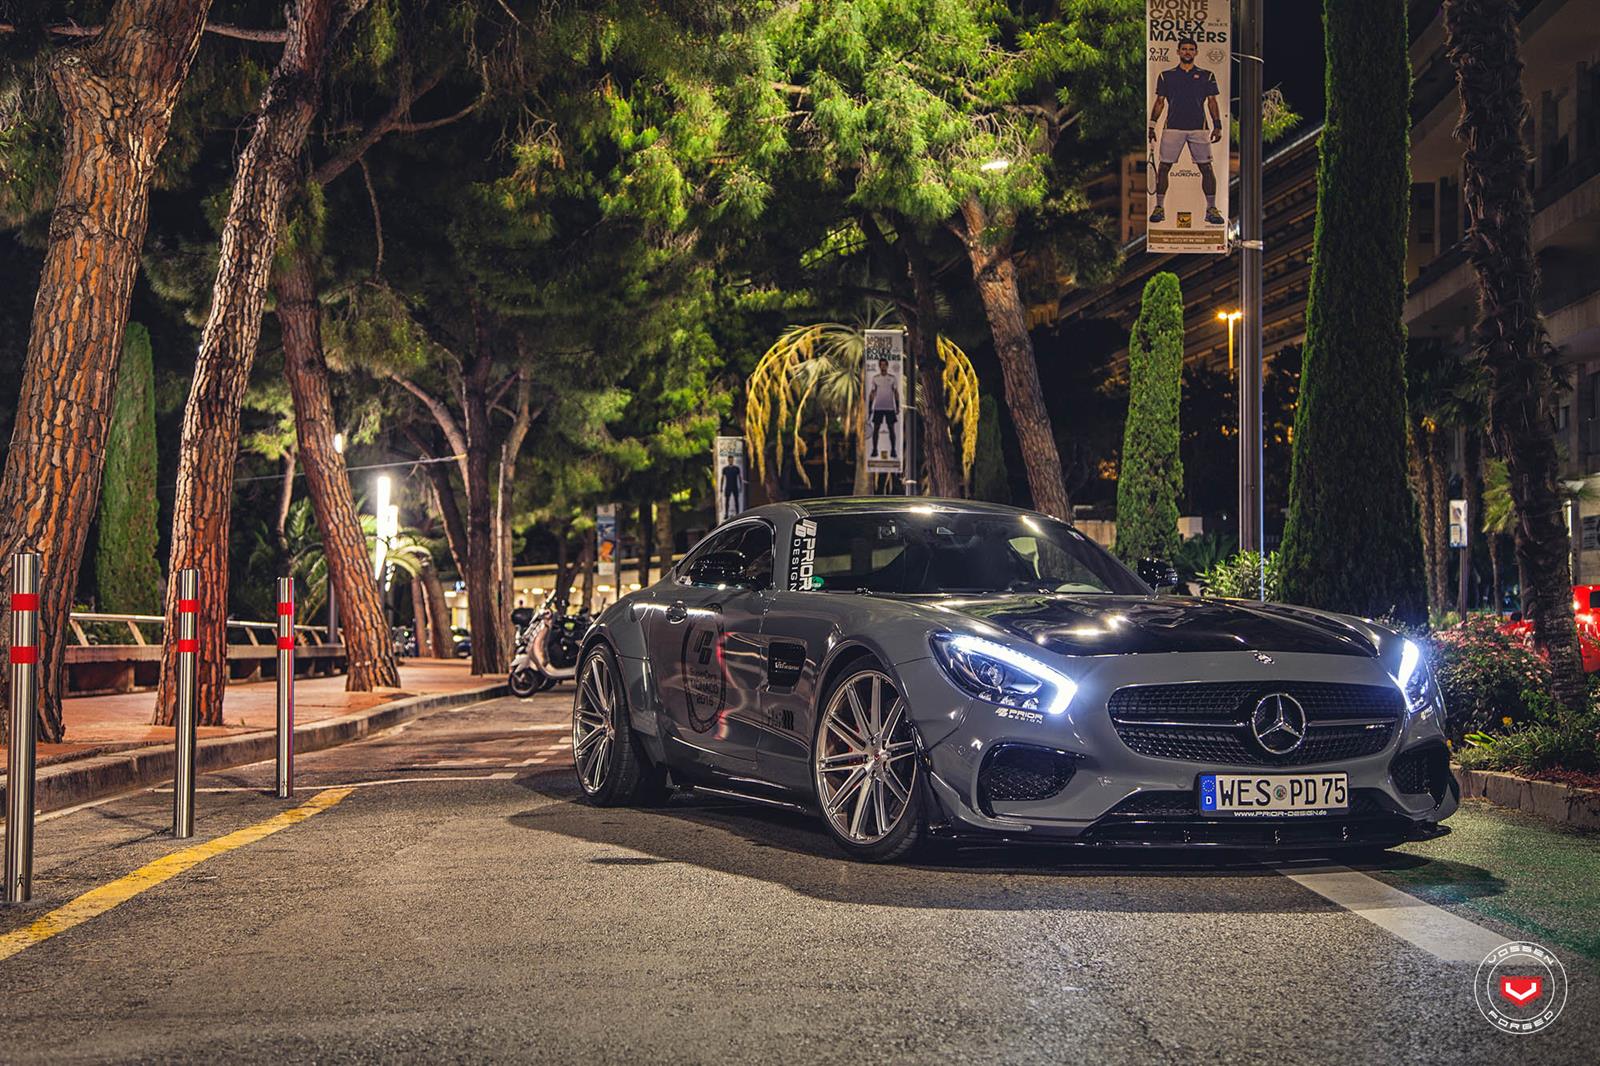 Prior-Design Merc AMG GT S Graces French Riviera | Carscoops1600 x 1066